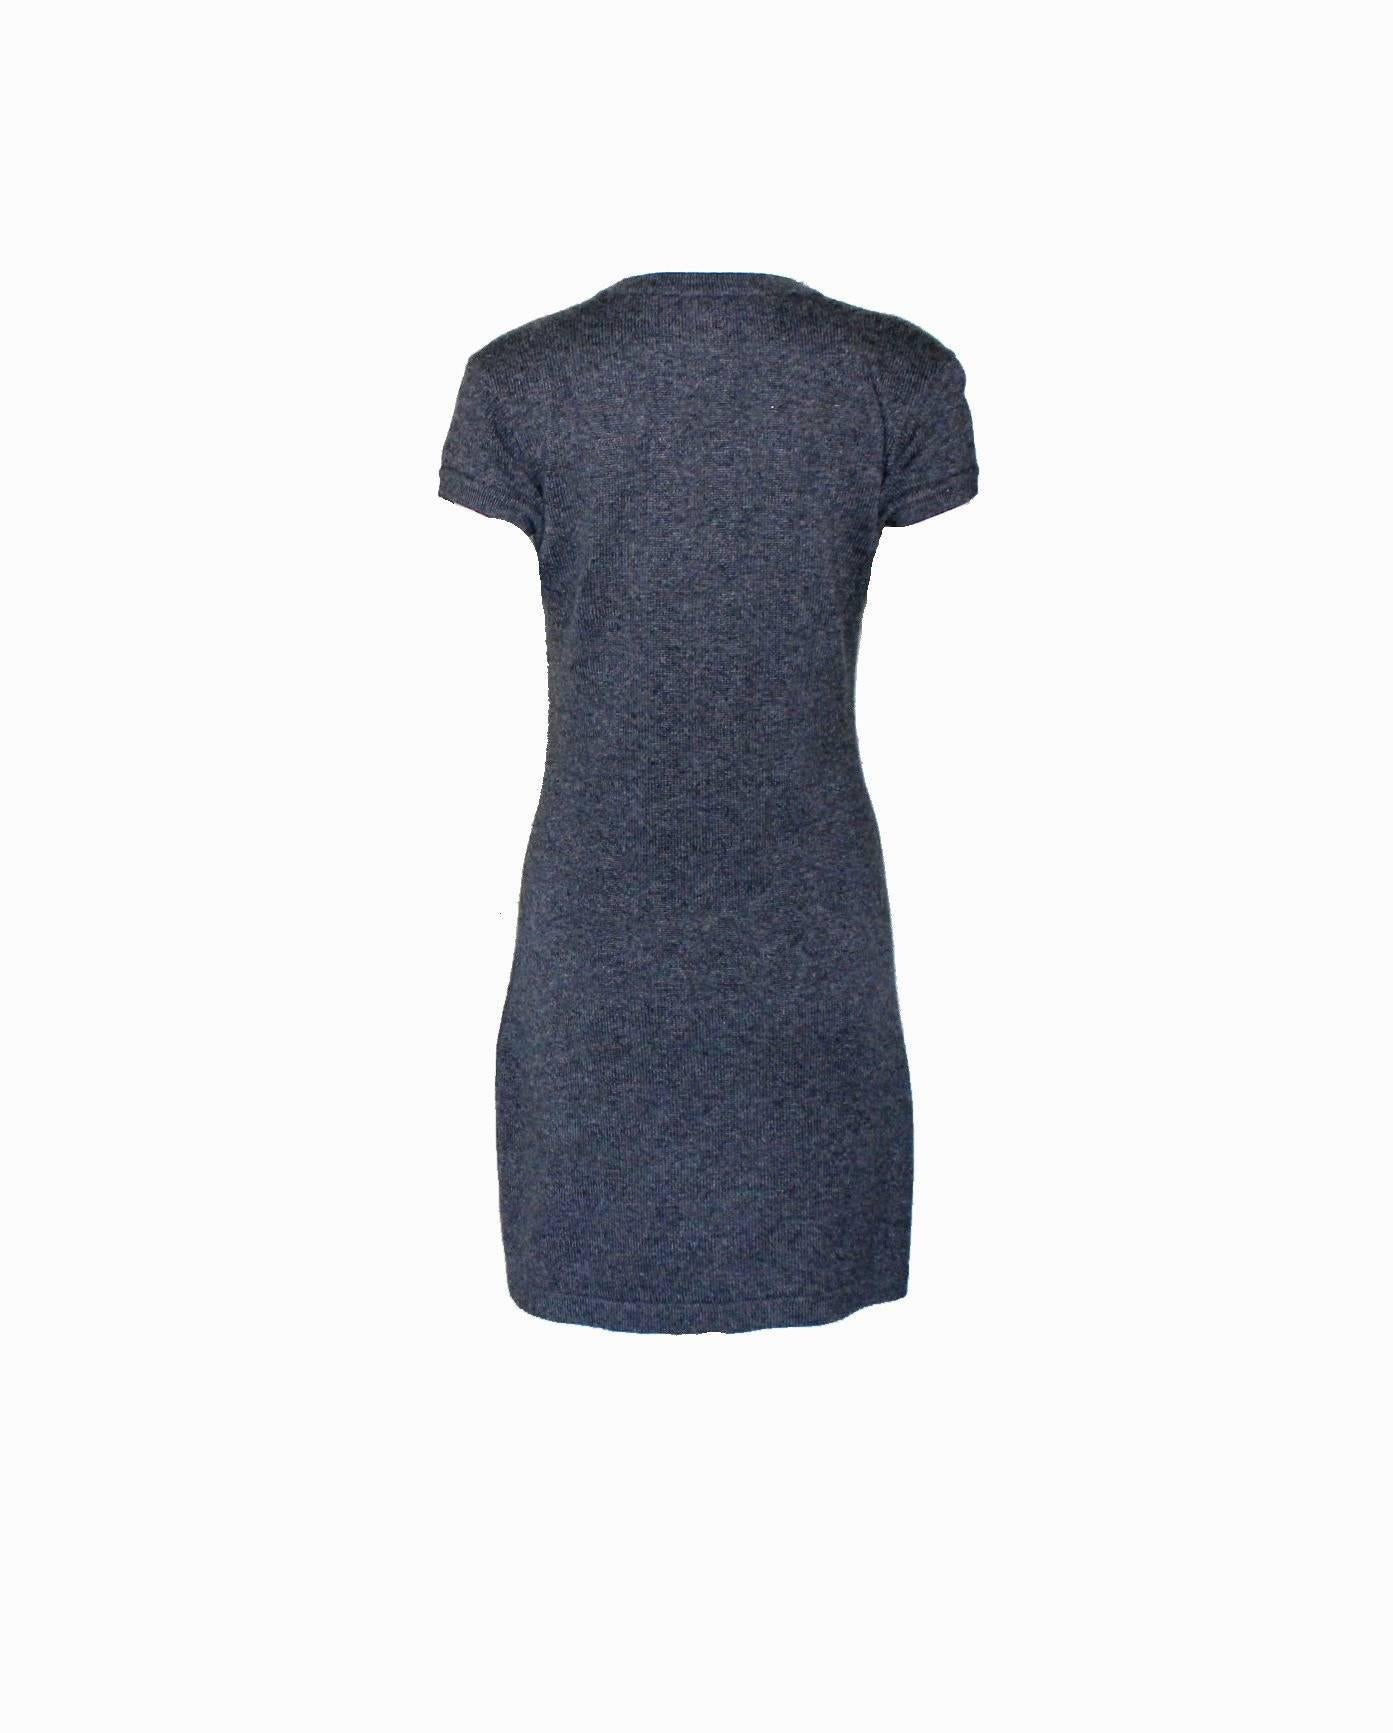 Bodyhugging signature cashmere dress by Chanel
A timeless classic
Simply slips on
Two front pockets
Charcoal grey color
Finest cashmere knit
COCO CHANEL PARIS Patch embroidered with pearls and camellia
Fashion Jewelry not included
Dry Clean